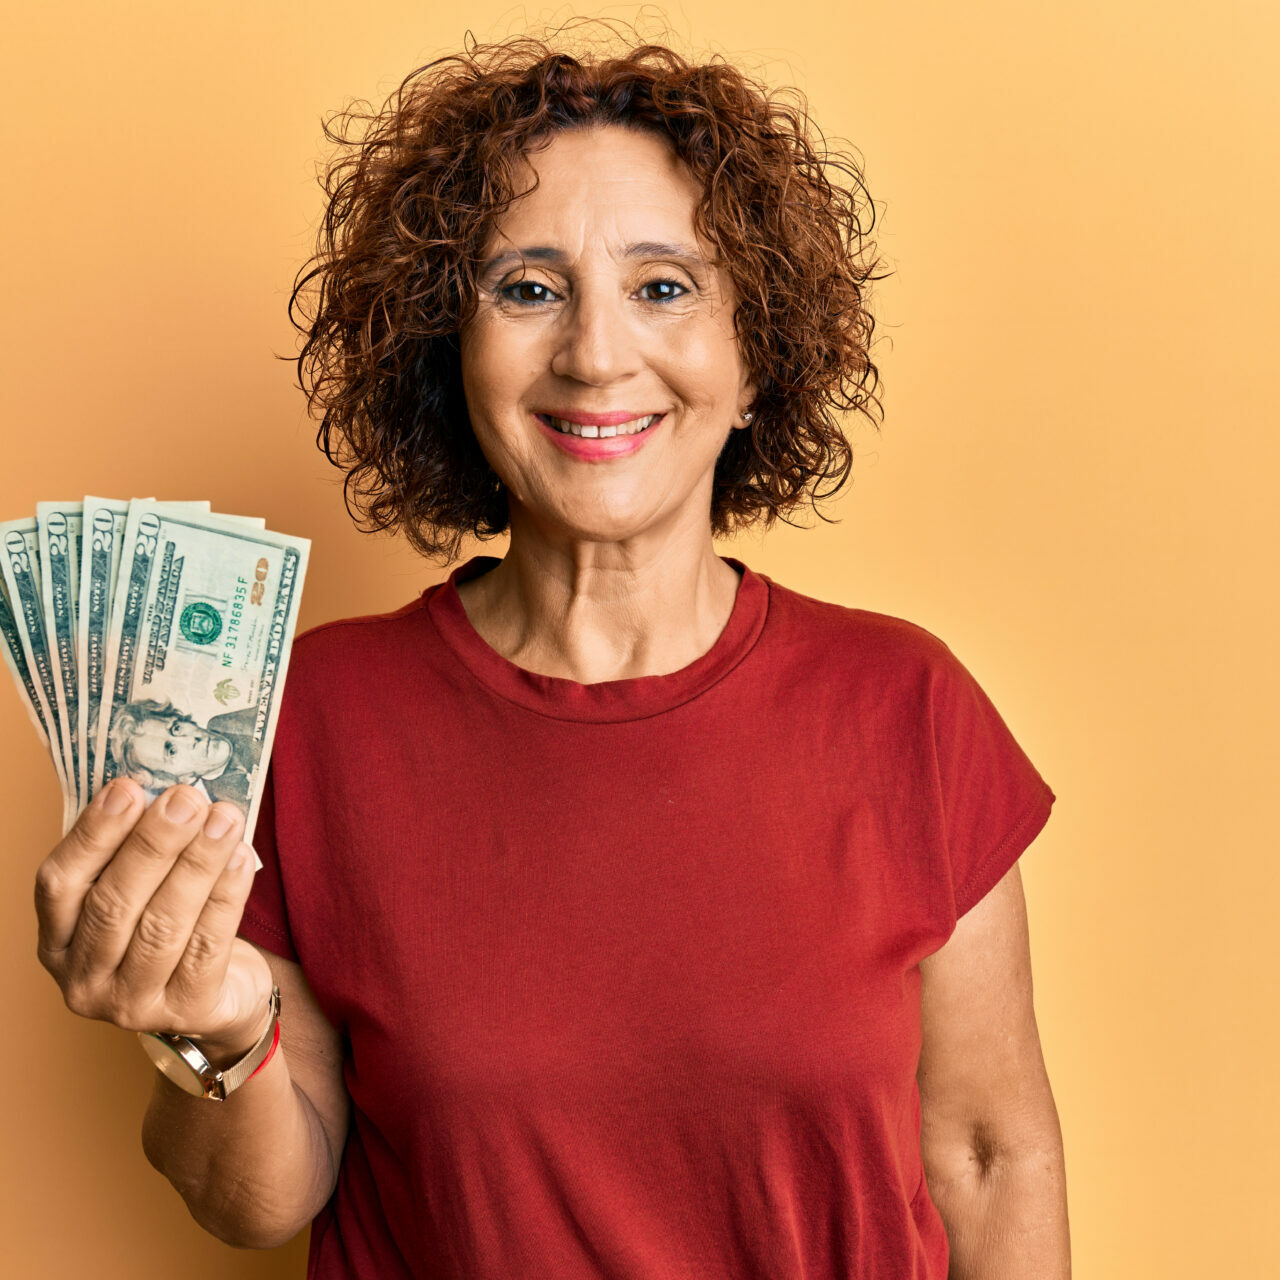 A hispanic woman with curly hair holds several $20 bills in her right hand. She is wearing a red t-shirt and the background is orange.